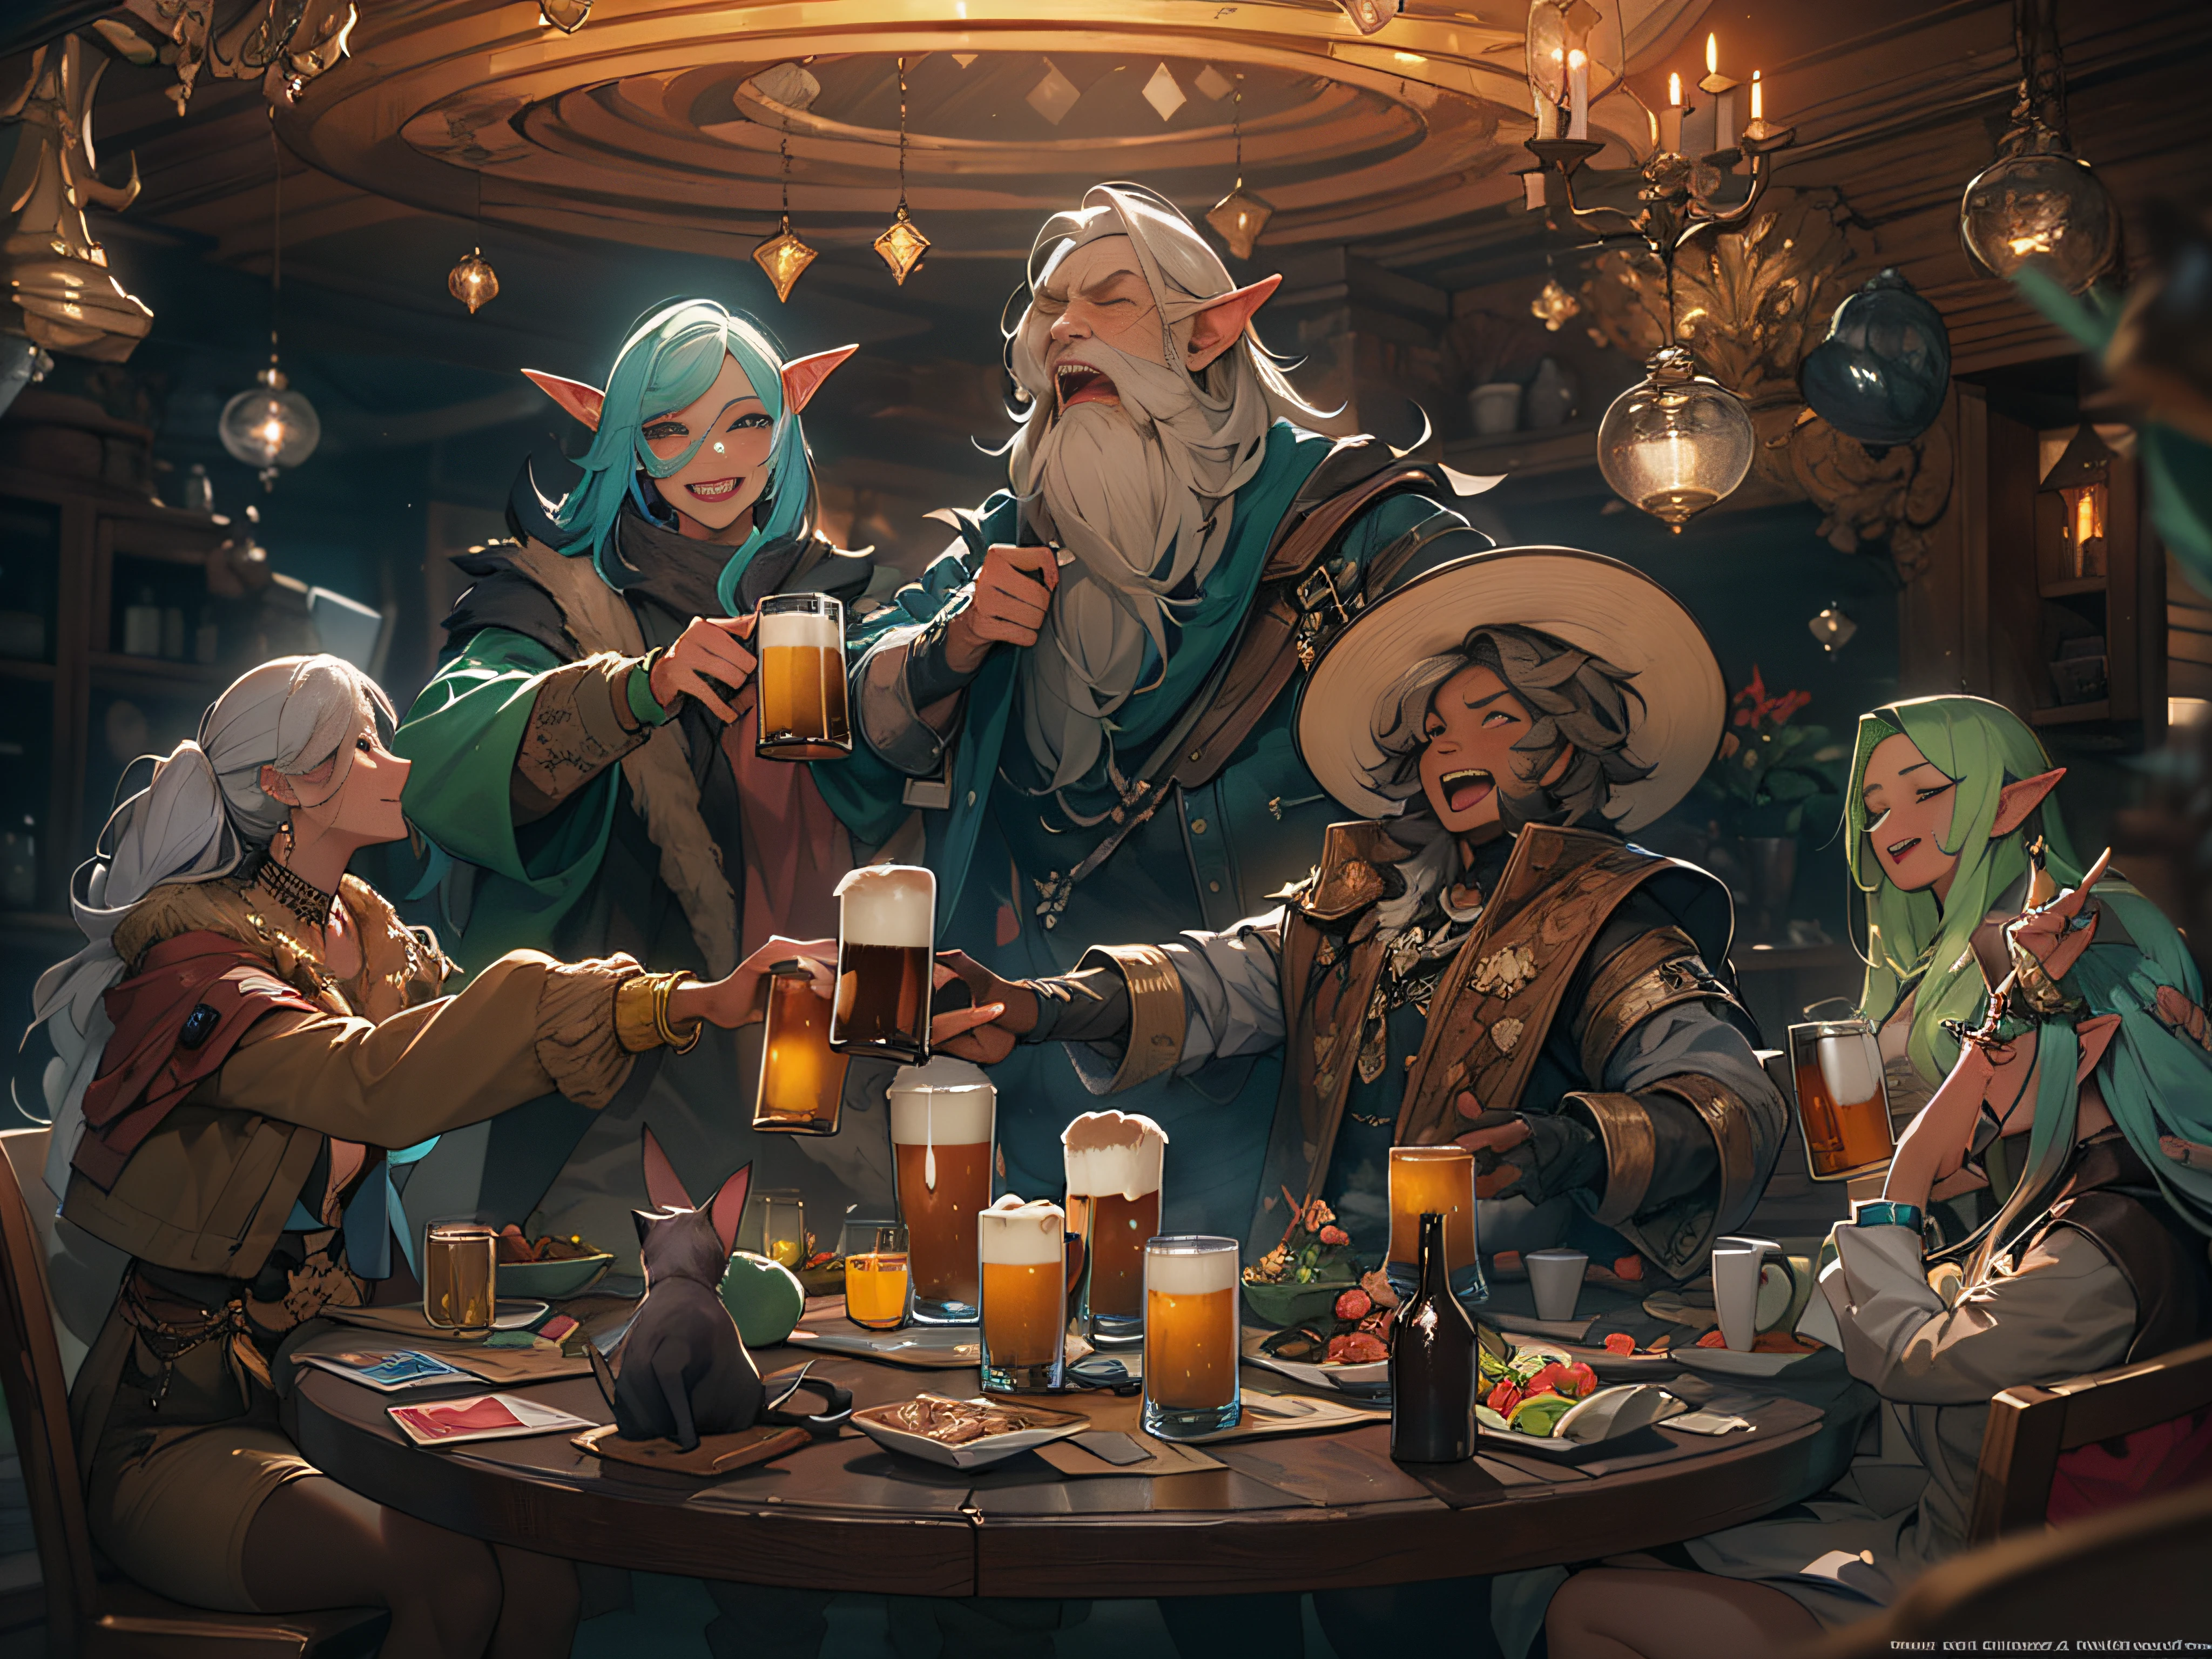 Masterpiece, top quality, otherworldly , ((5 people of 5 different races sitting around a round table)), they are happy and smiling, beer on the table, (((5 people toast with beer mugs)))+++, ((5 people hold beer))++, break 5 people are mixed gender, blonde elf, short muscled dwarf, cowboy, dark haired cat girl and old wizard BREAK fantasy, otherworldly fantasy, deep fantasy, all smiling , happy atmosphere, break, detail, realistic, 4k highly detailed digital art, octane rendering, bioluminescence, break 8K resolution concept art, realism, mappa studio, official art, illustration, ligne clair, (cool_color), perfect composition, absurdity, fantasy, focus, rule of thirds